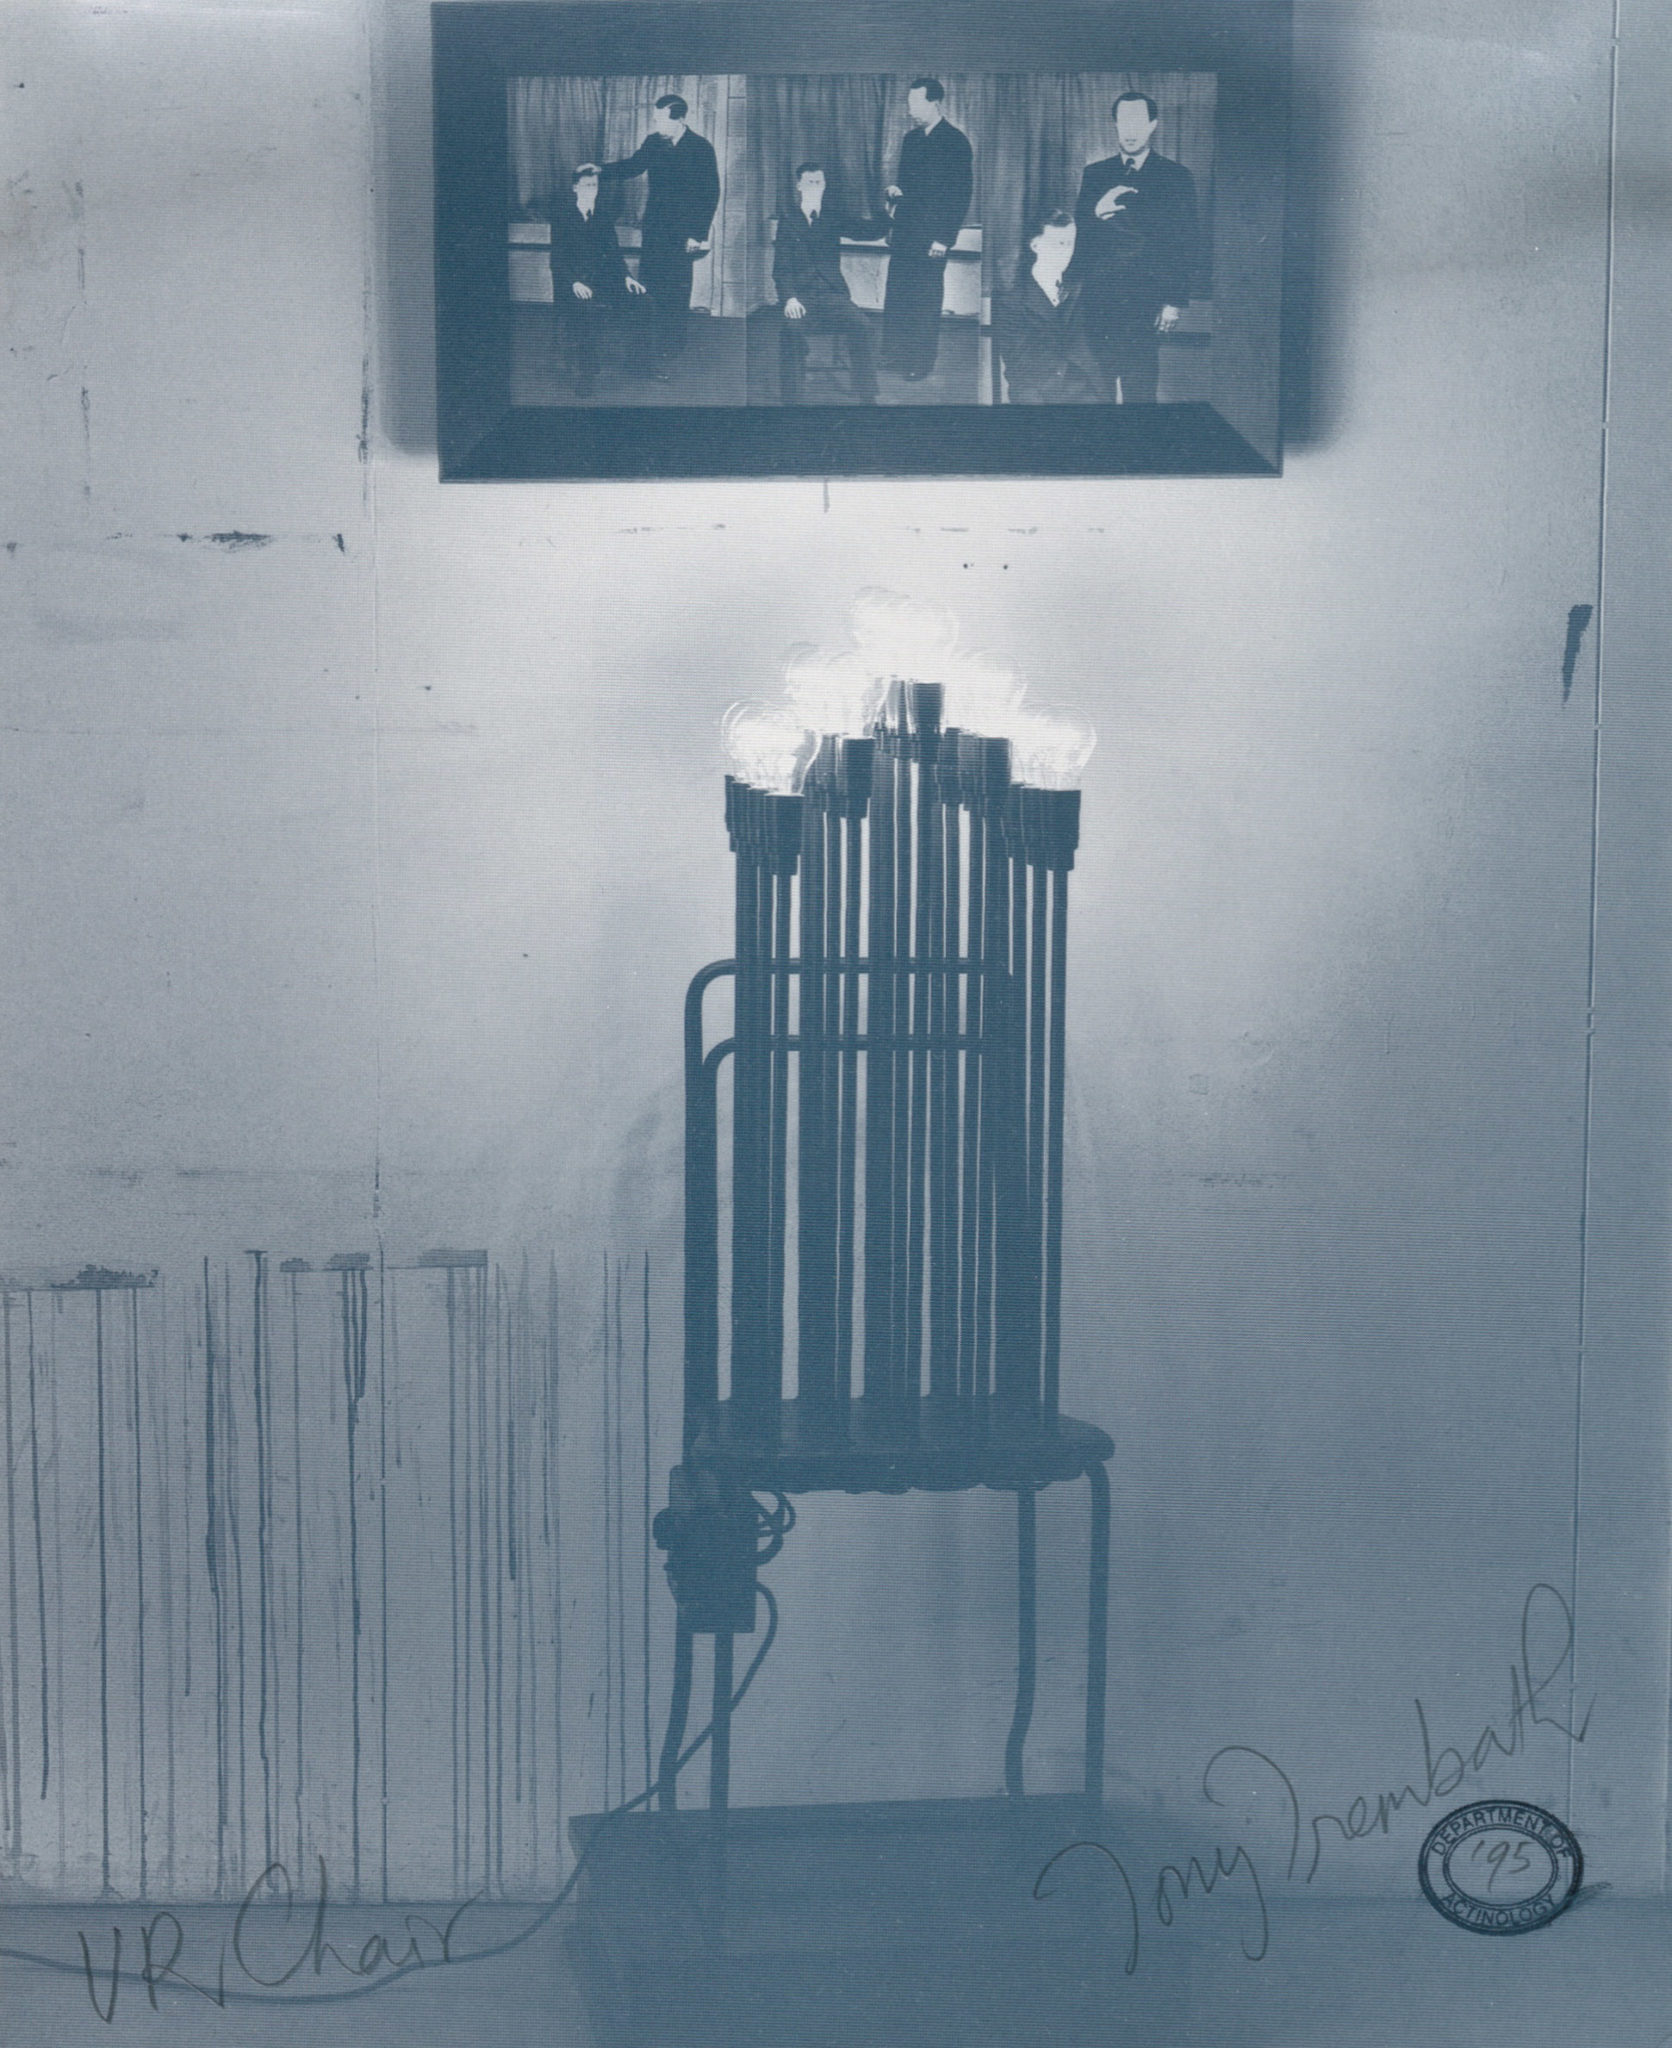 Tony Trembath, VR Chair, 1997, Offset print, 21 x 17 cm, Latrobe Regional Gallery Collection, gift of the artist, 1997.